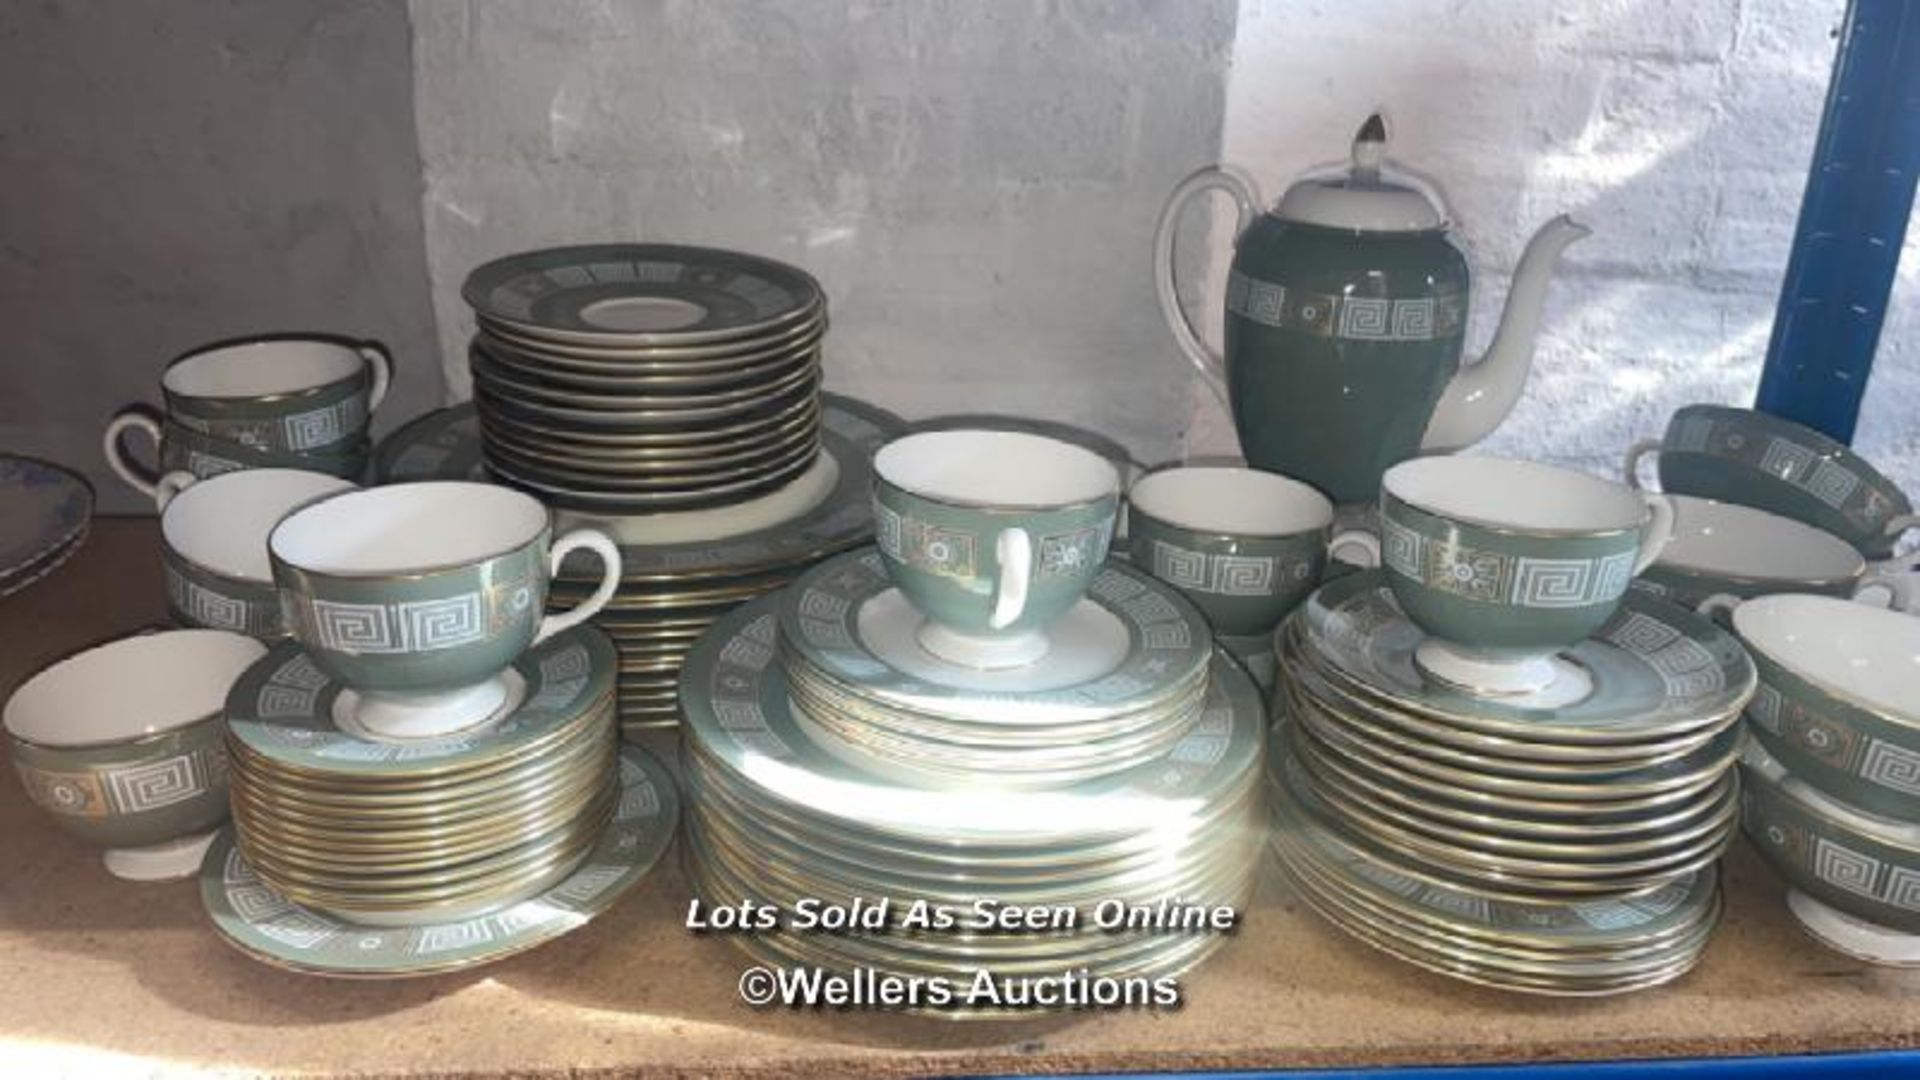 PART WEDGEWOOD "ASIA" GREEN & WHTE DINNER SERVICE INCLUDING, CUPS, SAUCERS, PLATES, SOUP BOWLS AND